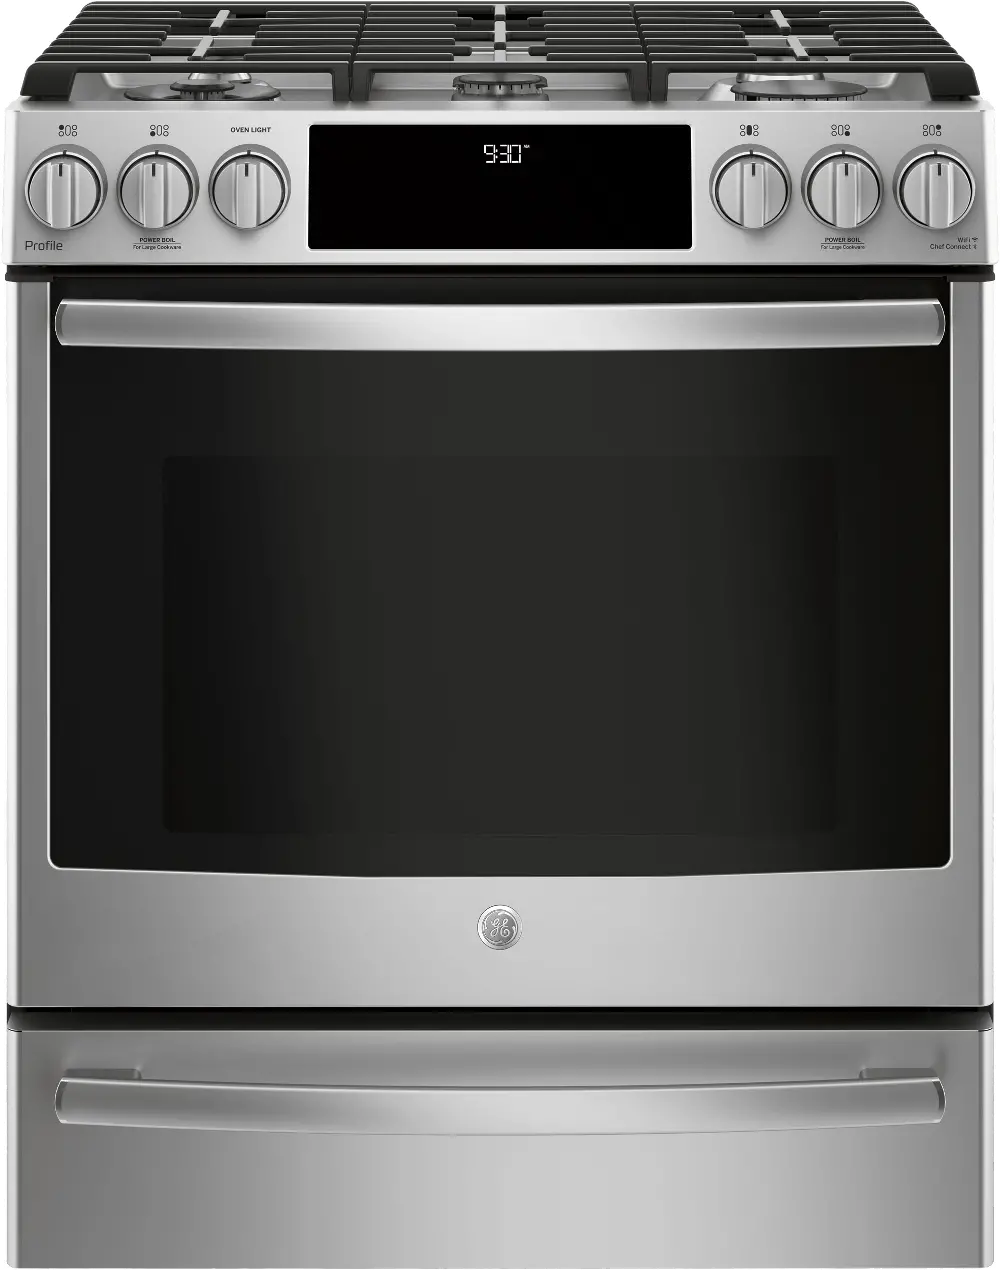 PGS930SELSS GE Profile Gas Range - 5.6 cu. ft. Stainless Steel-1